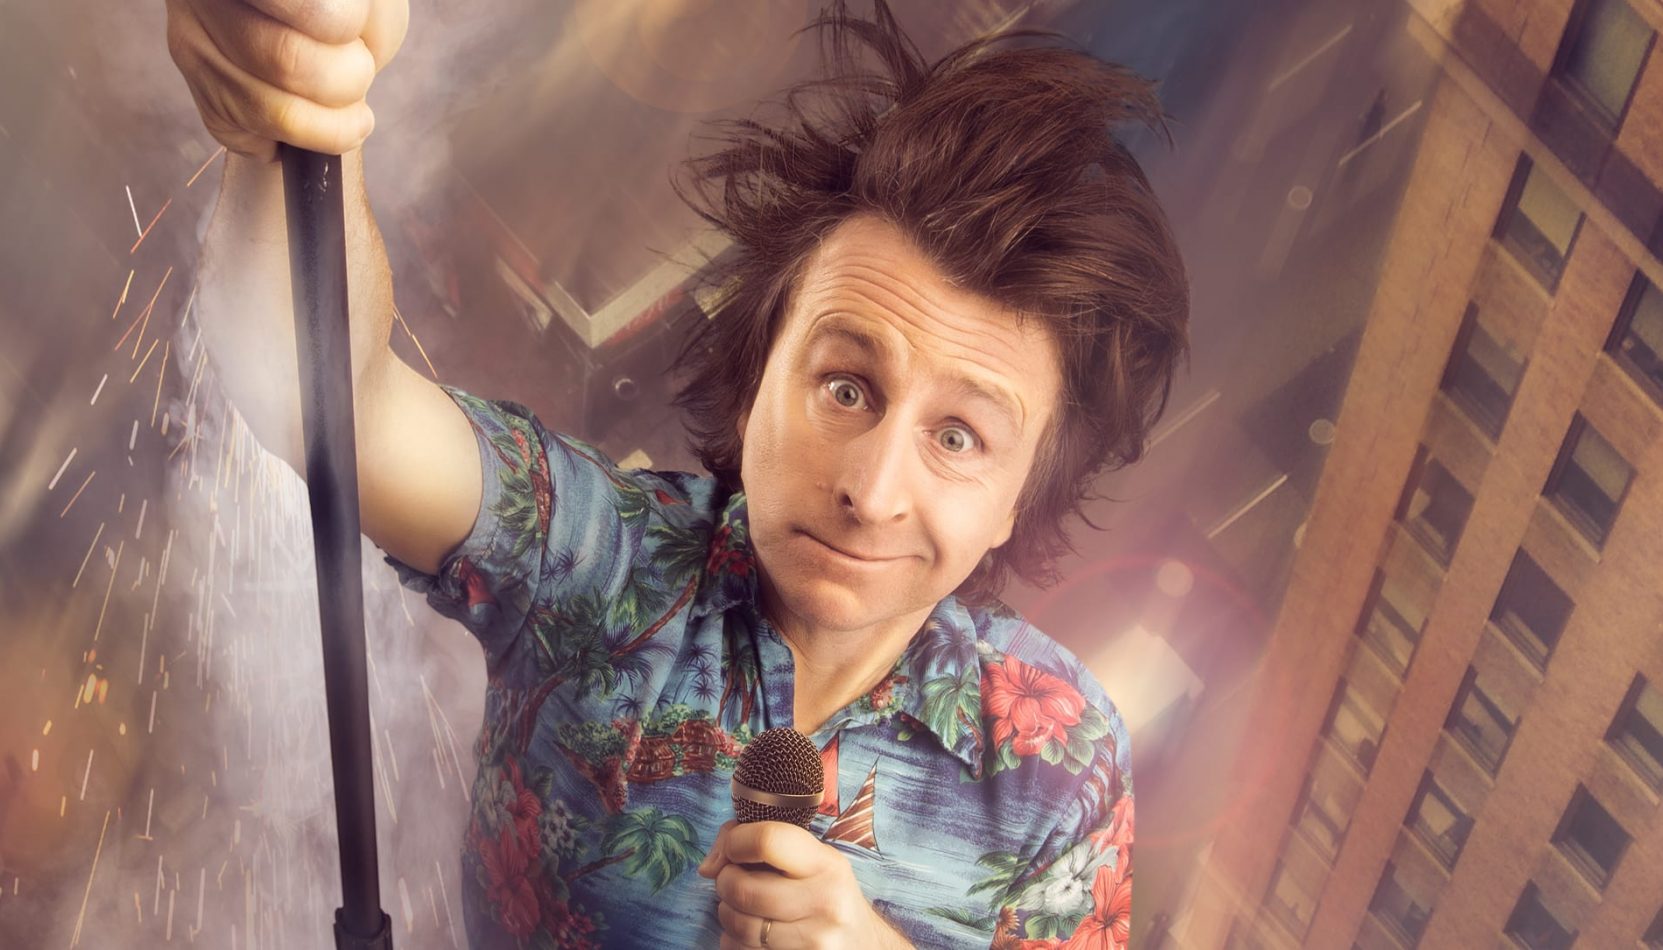 milton jones, milton impossible, comedy, stand up comedy, farnham malting, farnham, surrey, december 2019, events, gigs, whats on, events, things to do in surrey, guide to, guide to whats on, guide to surrey, guide to going out, guide to